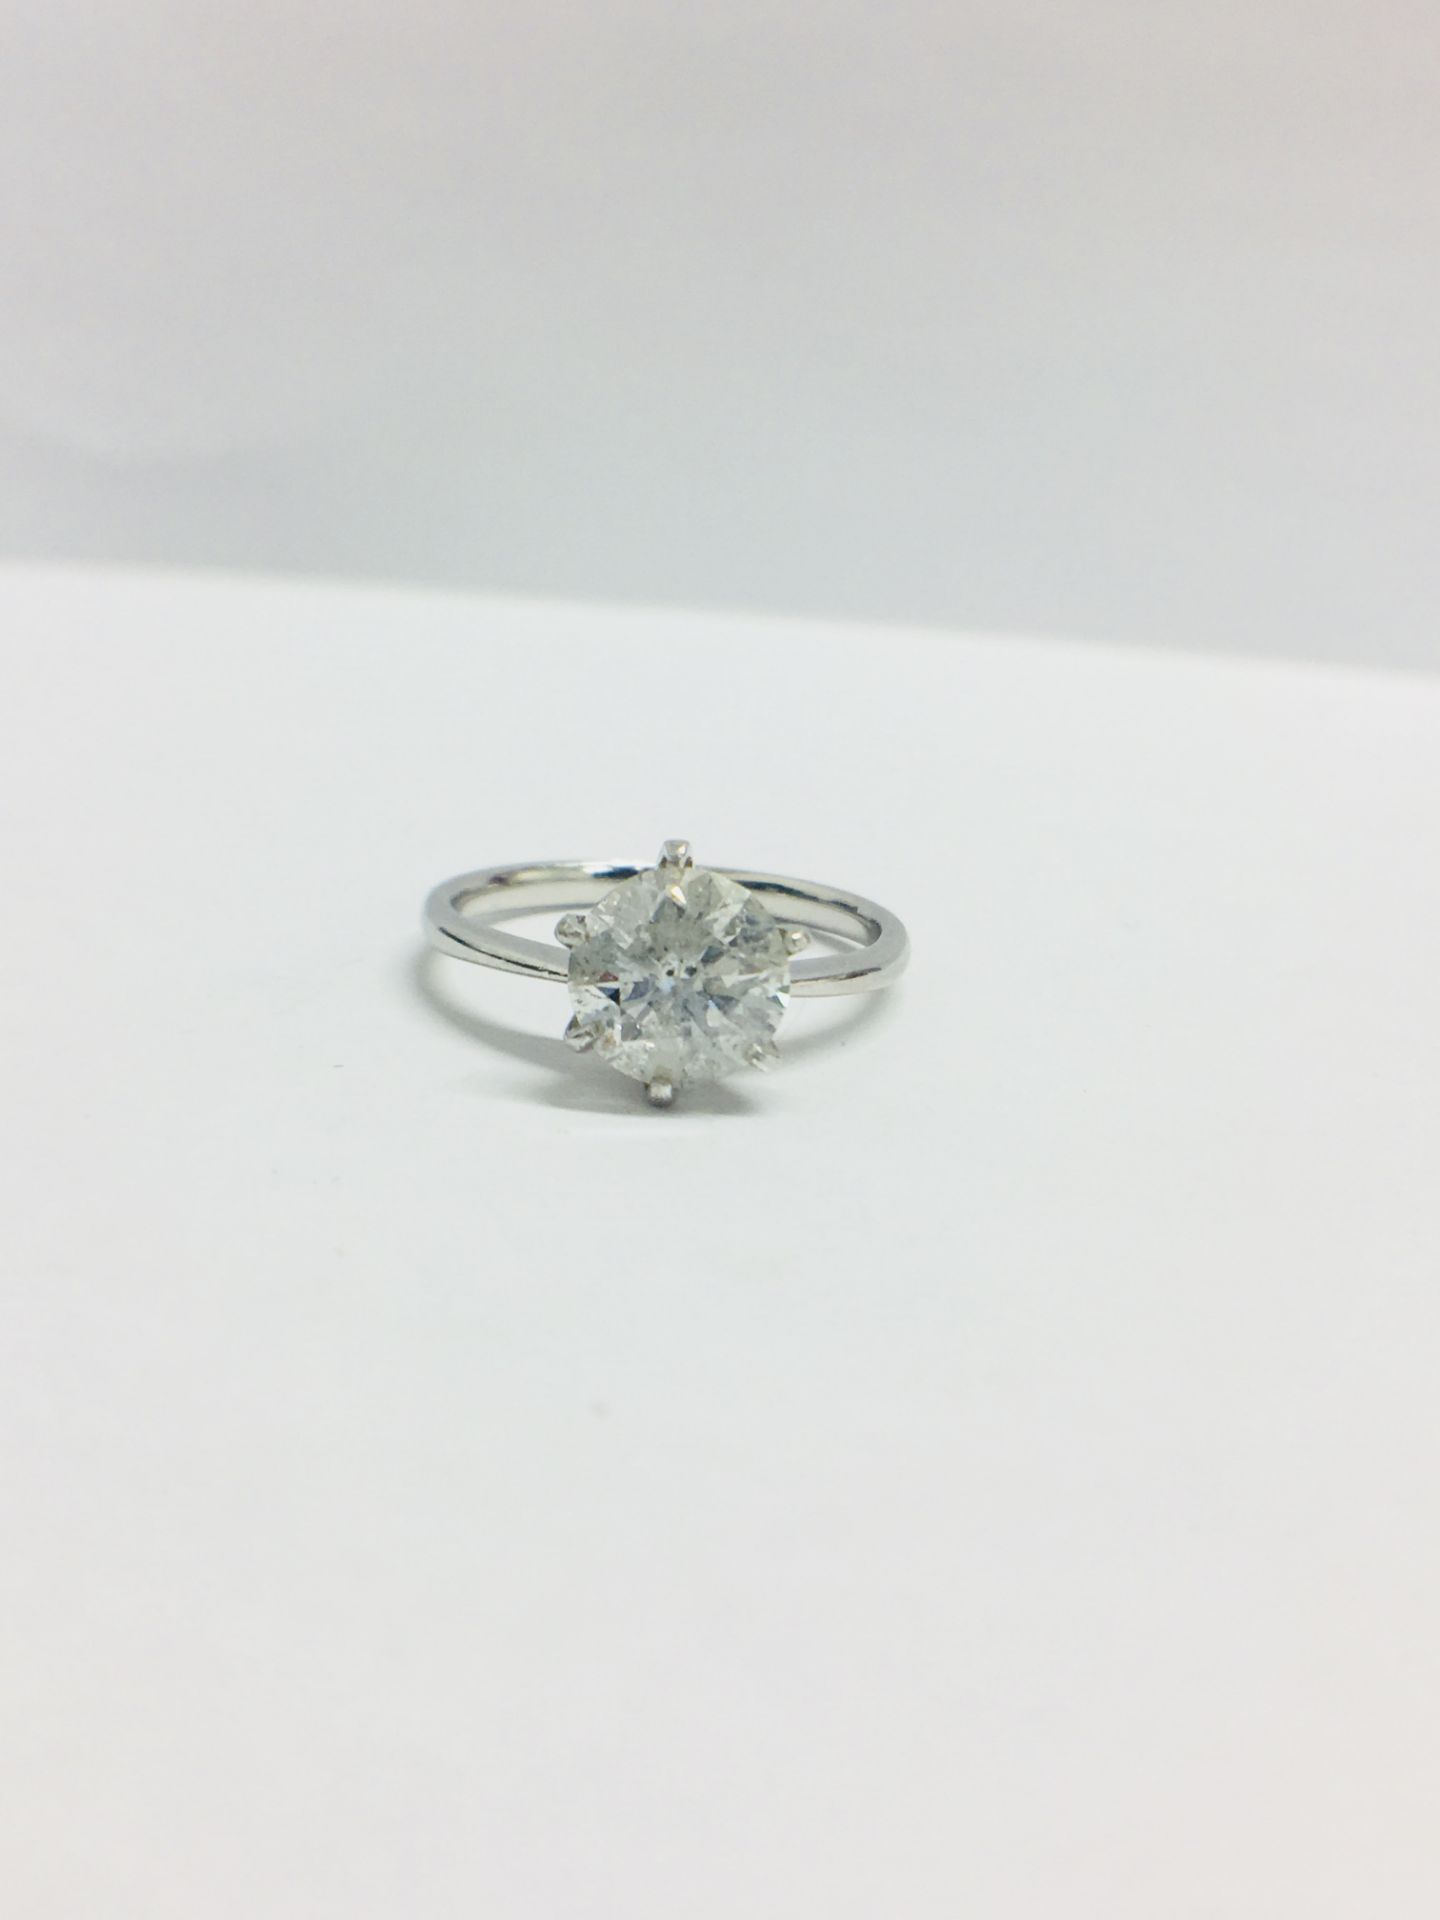 1.73ct diamond solitaire ring set in platinum. I colour and I1 clarity. 4 claw setting. Ring size M.